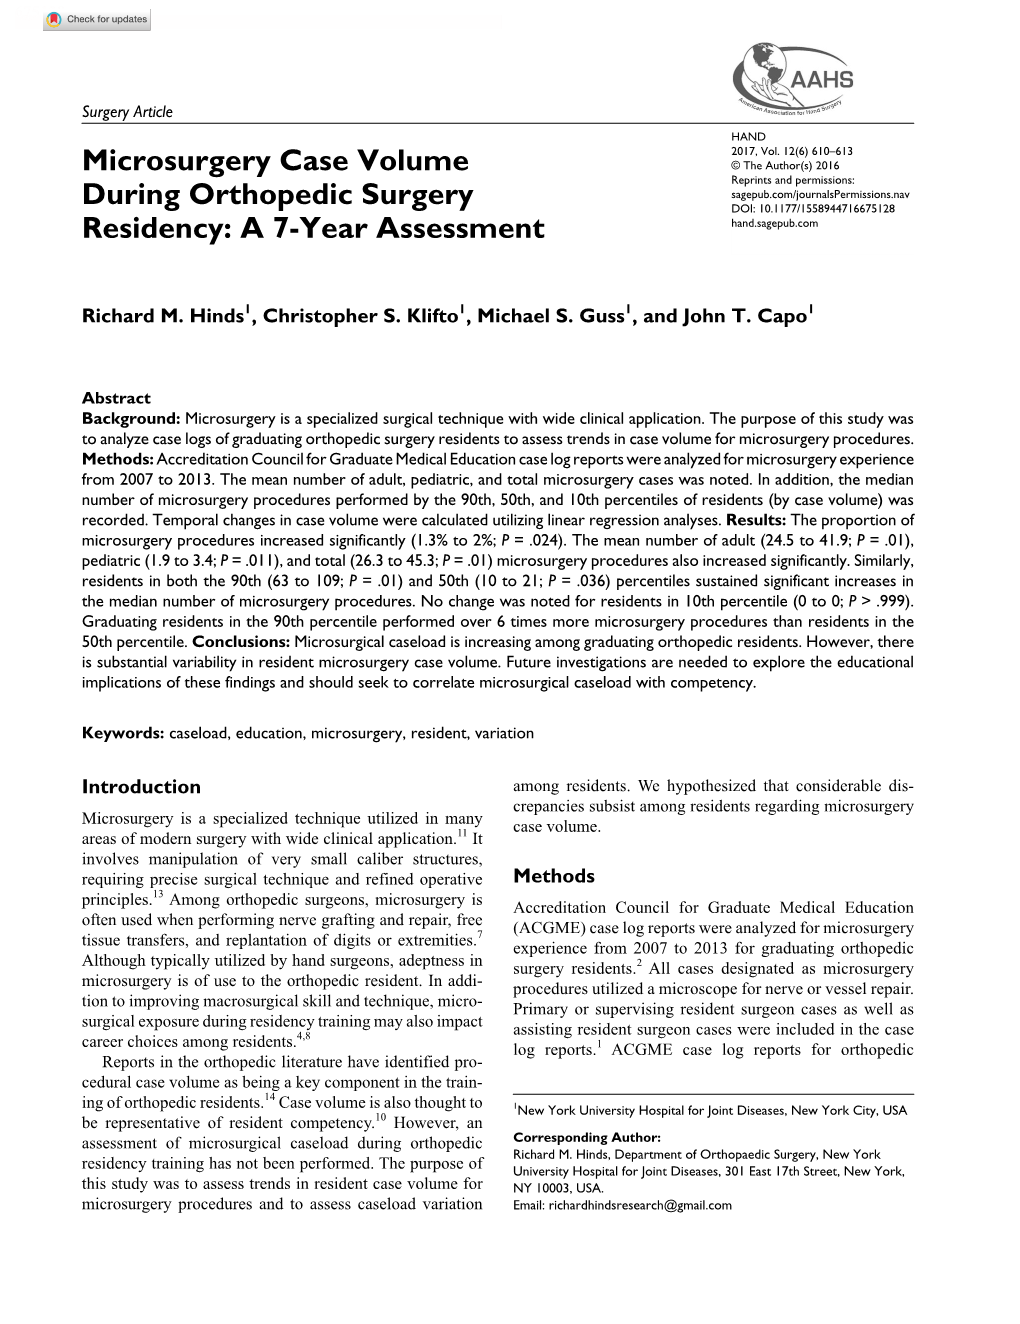 Microsurgery Case Volume During Orthopedic Surgery Residency